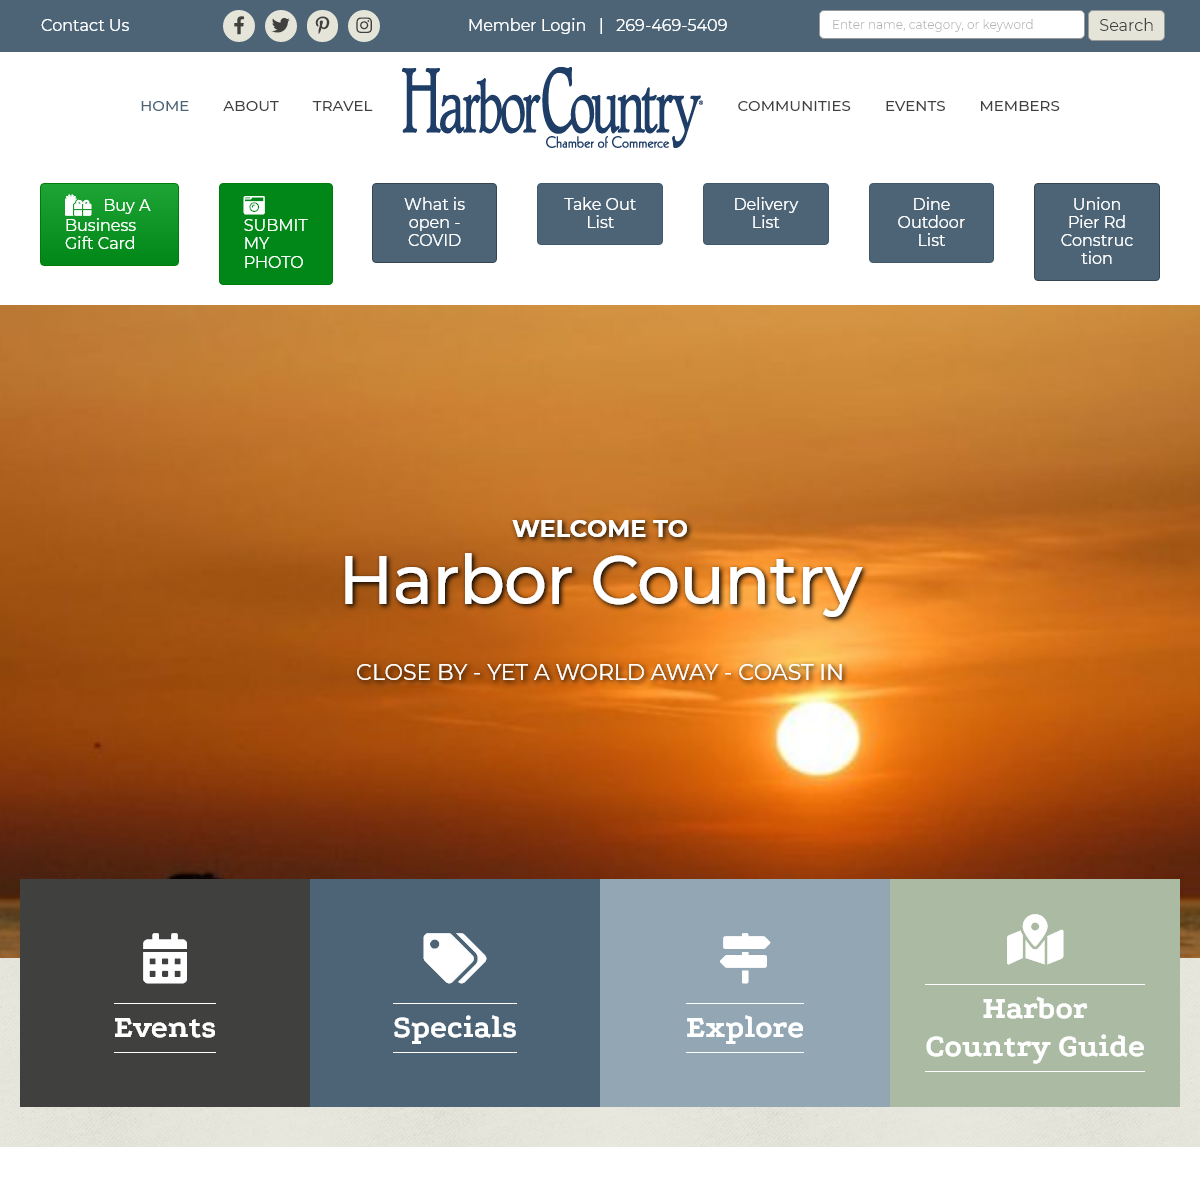 A complete backup of harborcountry.org